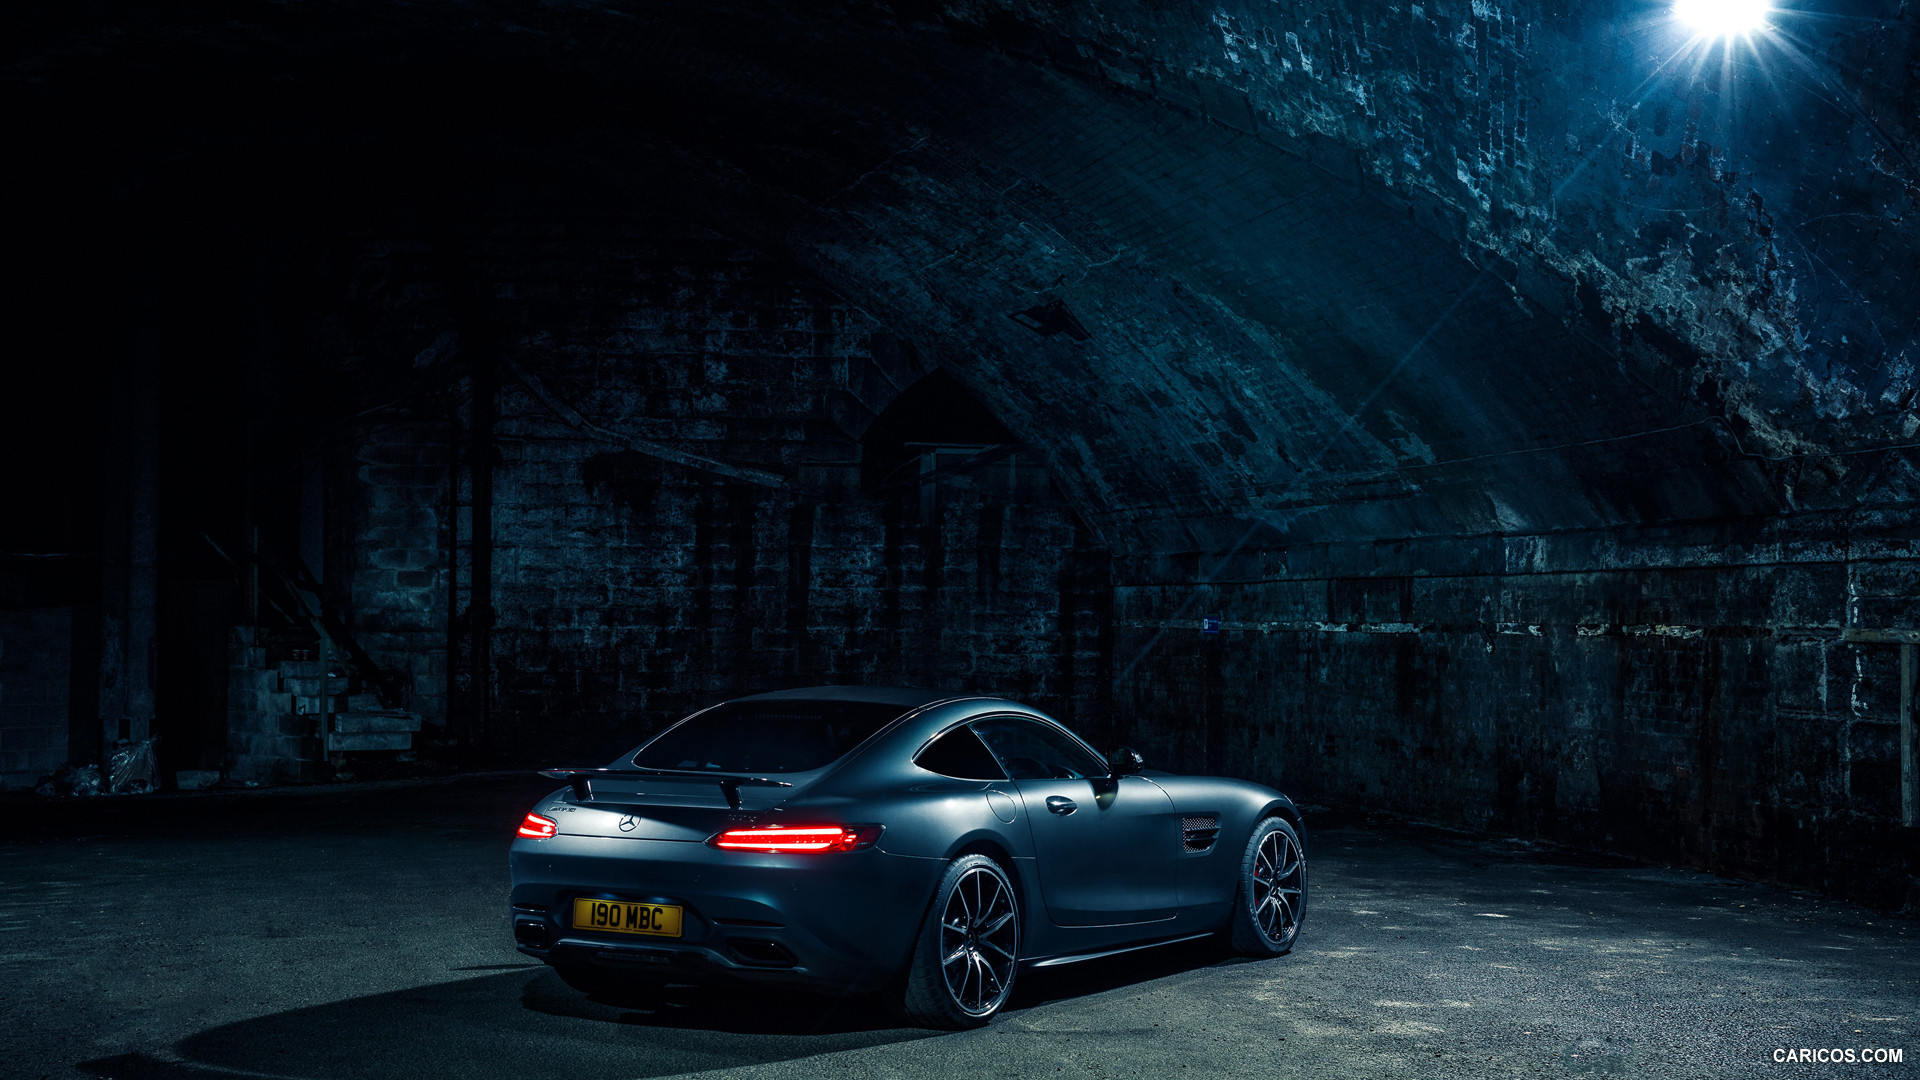 2016 Mercedes-AMG GT S Edition 1 (UK-Spec)  - Rear, #37 of 79